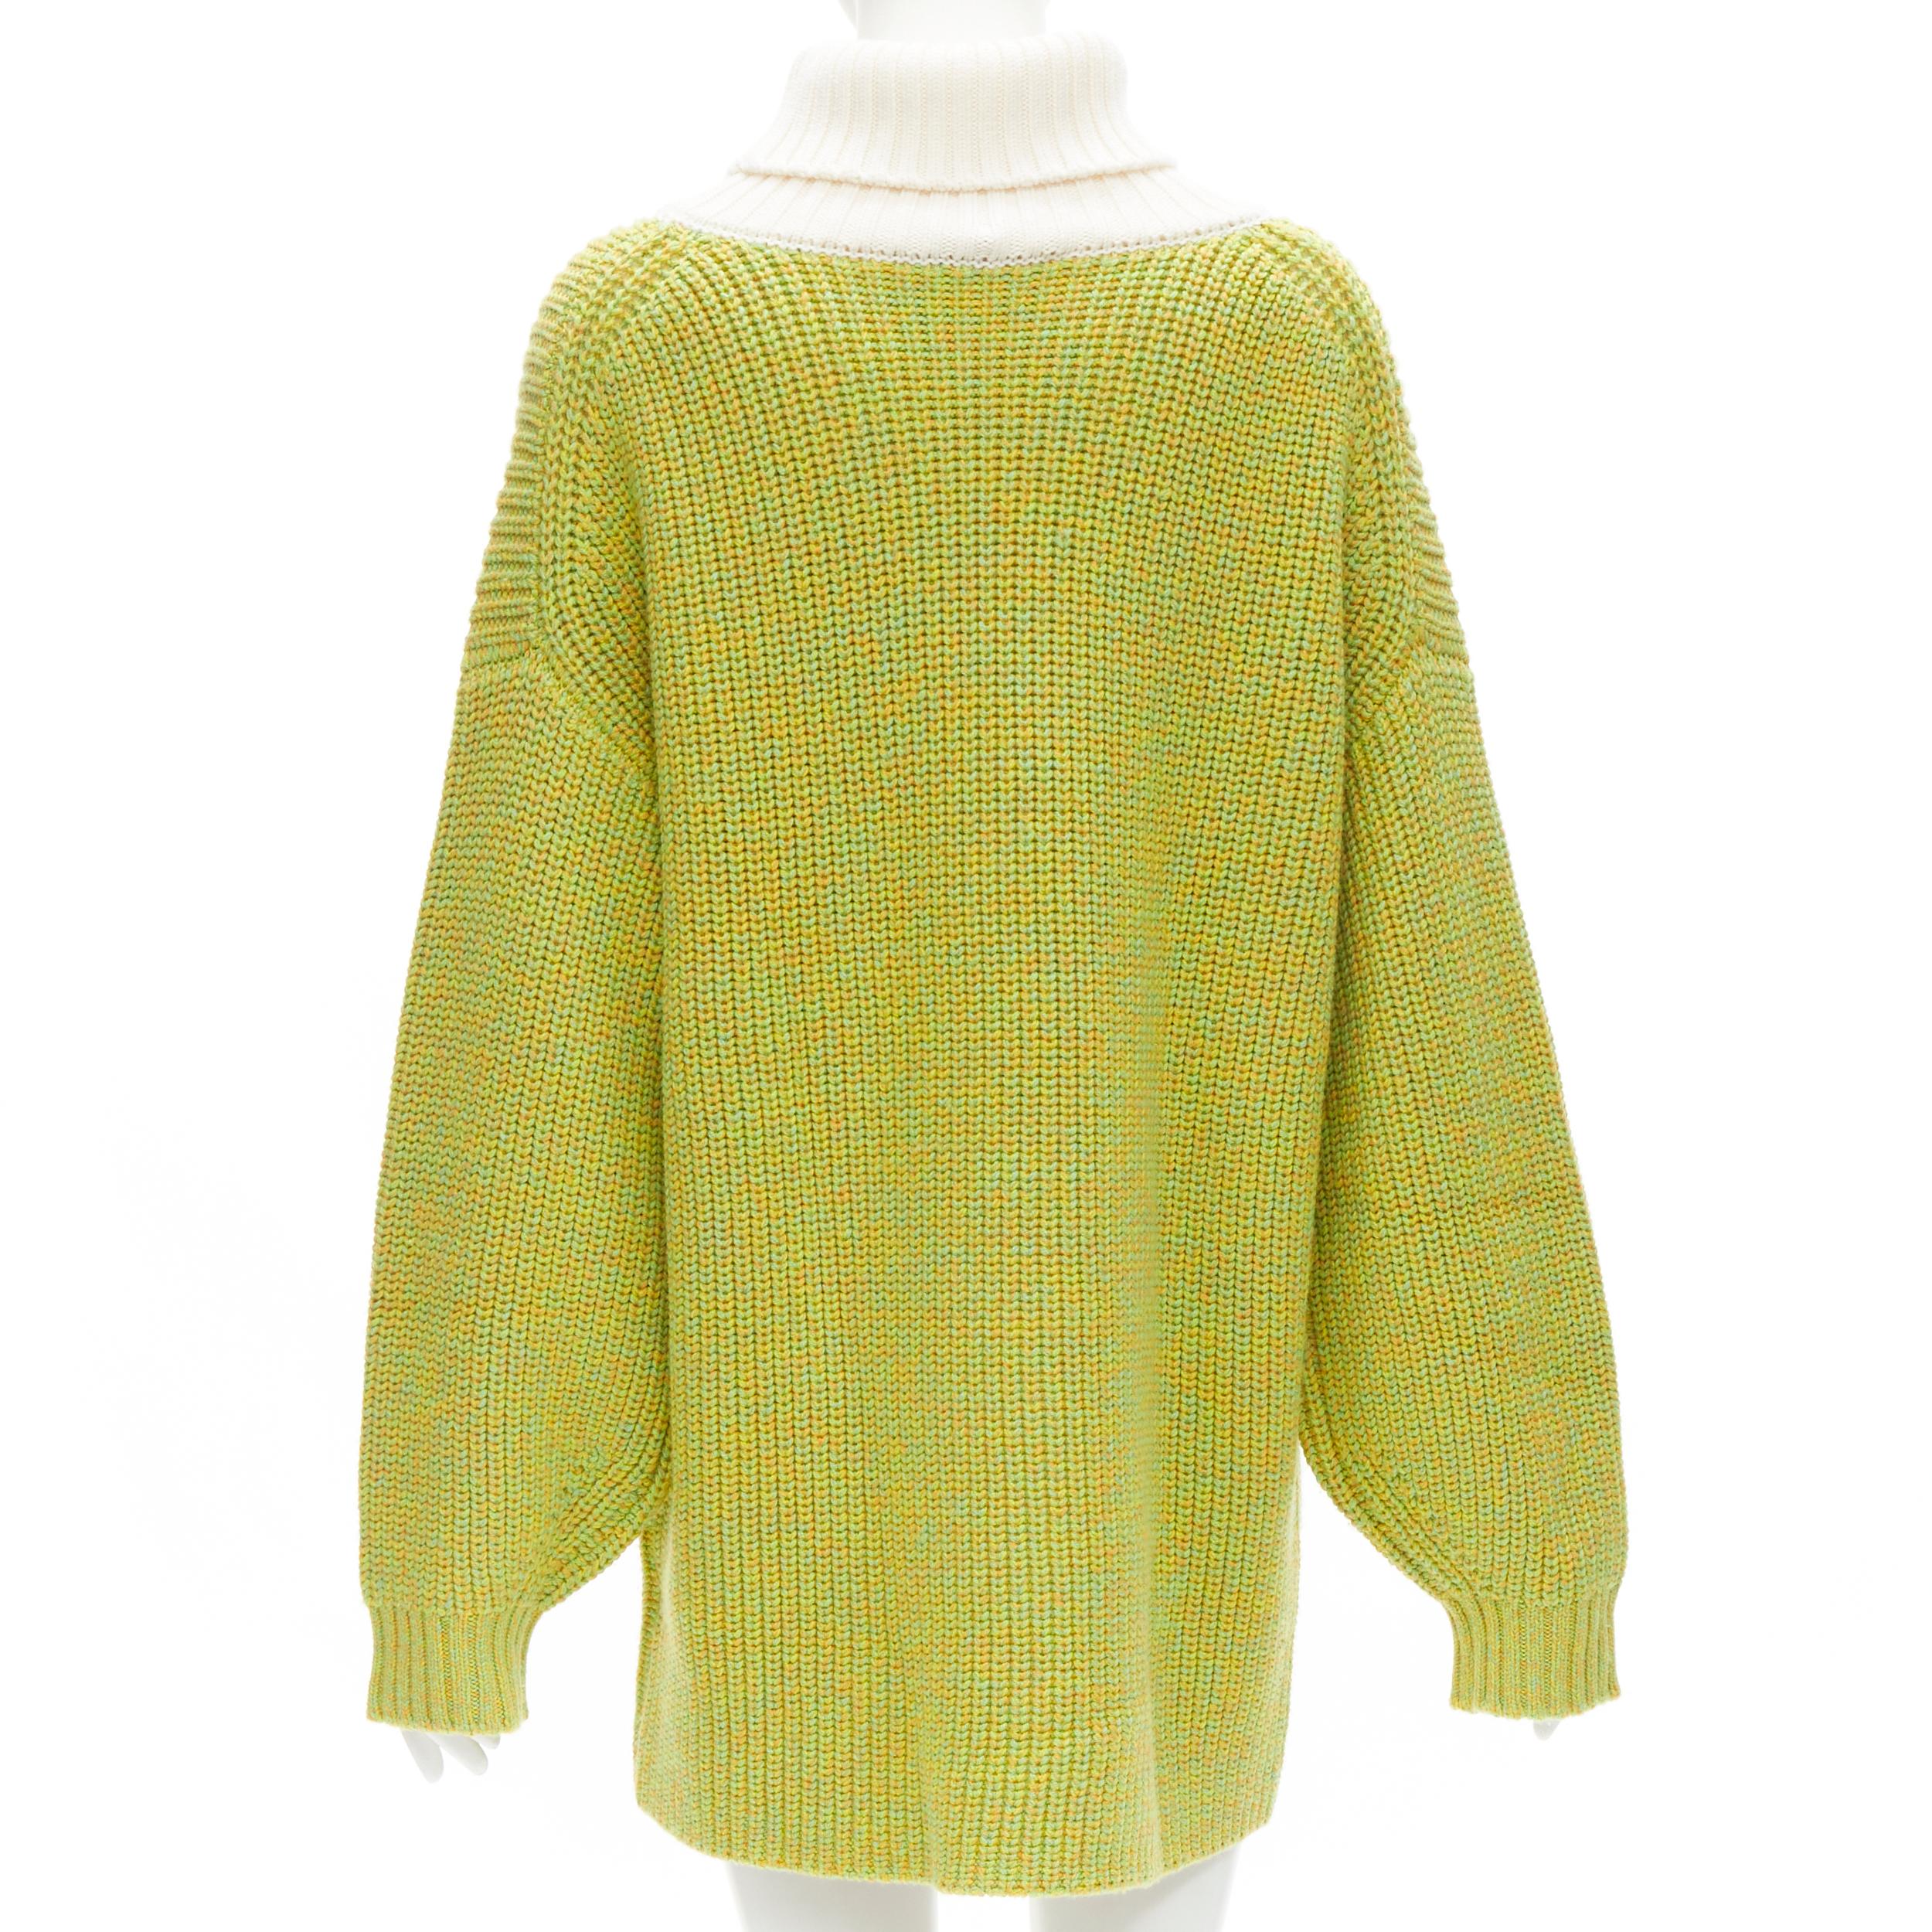 Women's TIBI 100% merino wool lime yellow contrast rolled turtleneck sweater M/L For Sale